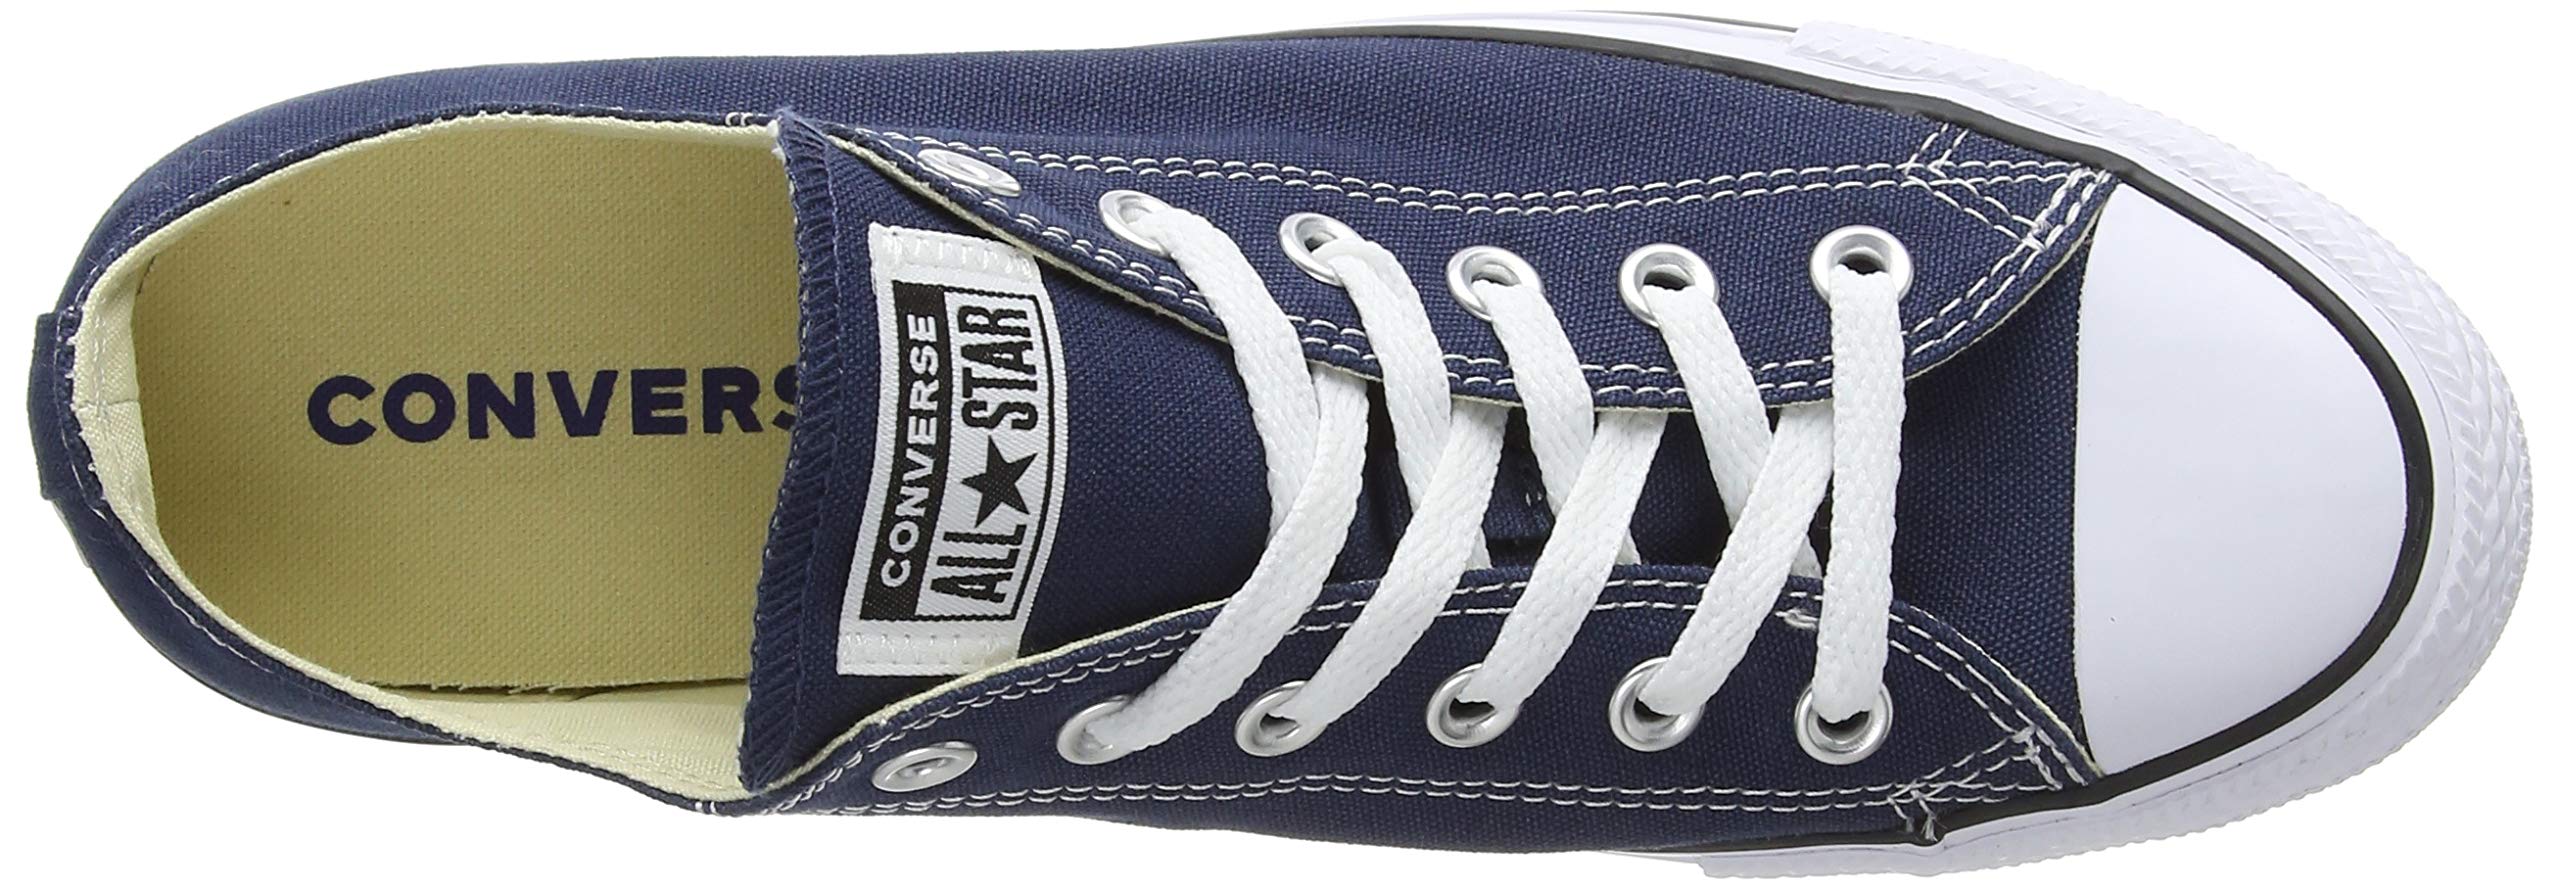 Converse All Star Ox Sneakers - image 3 of 15